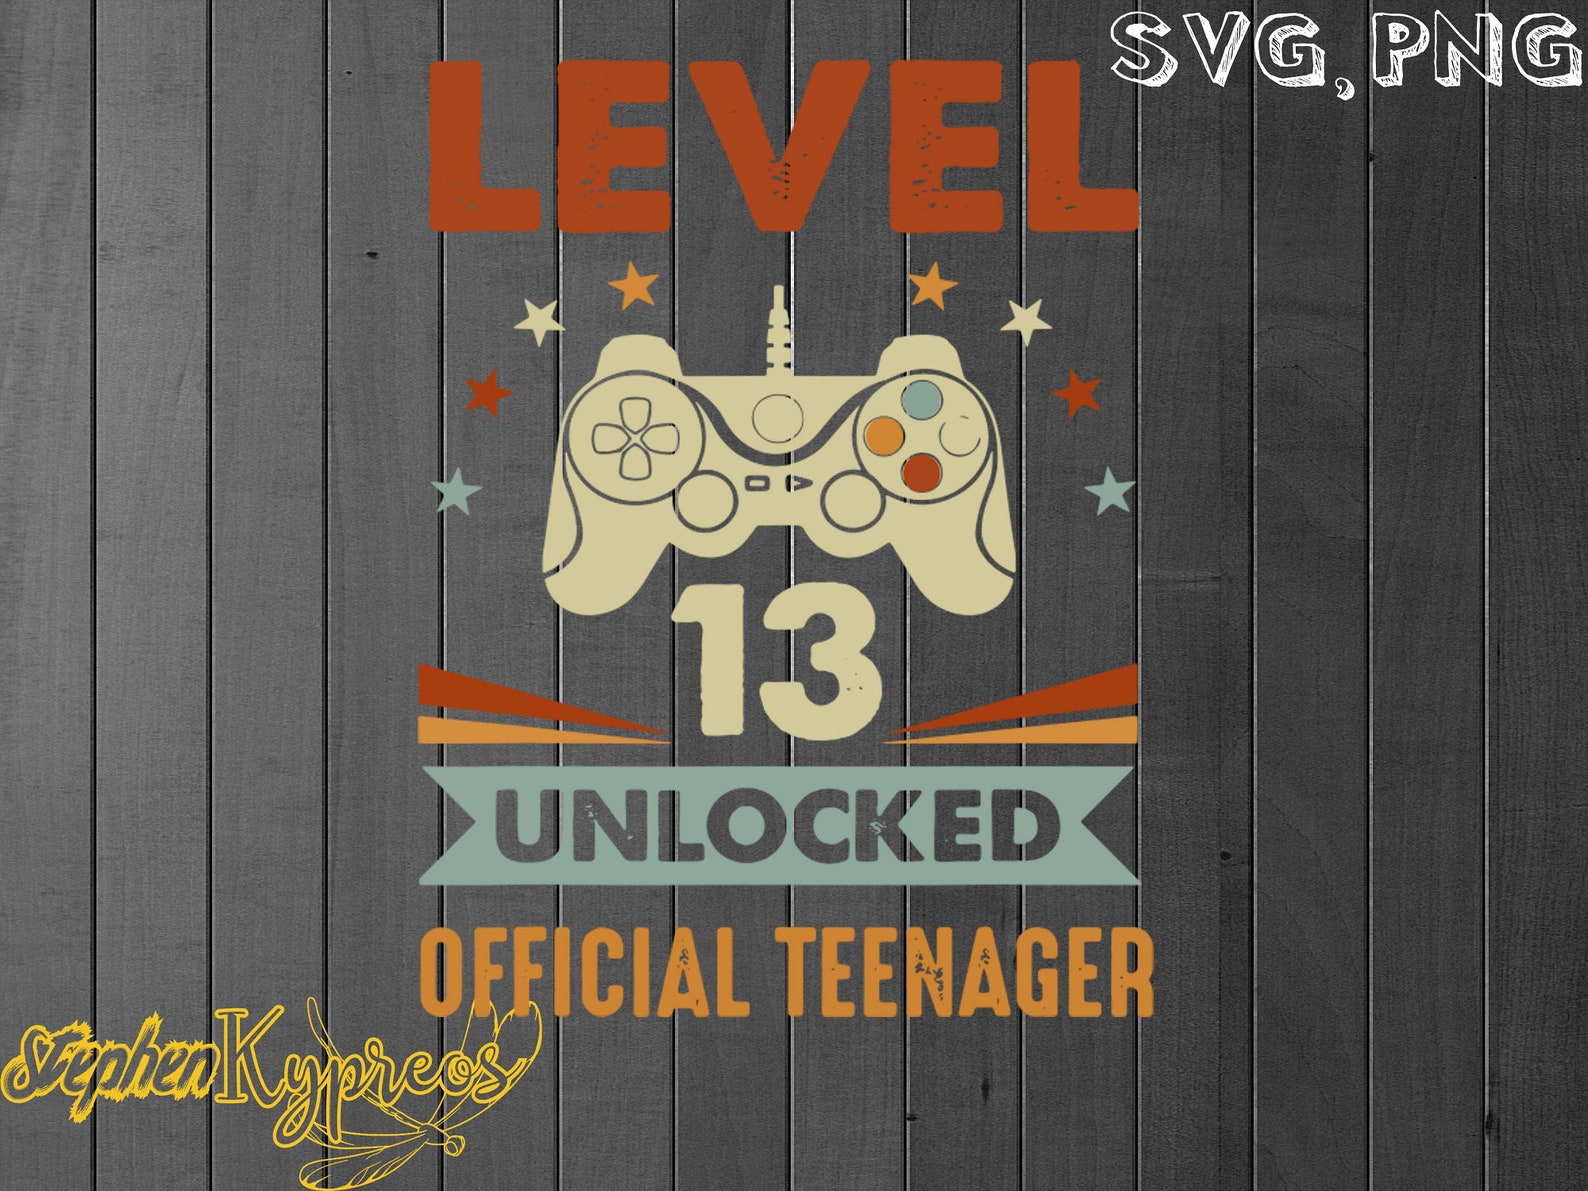 Official Teenager 13th Birthday Level 13 Unlocked SVG PNG | Etsy